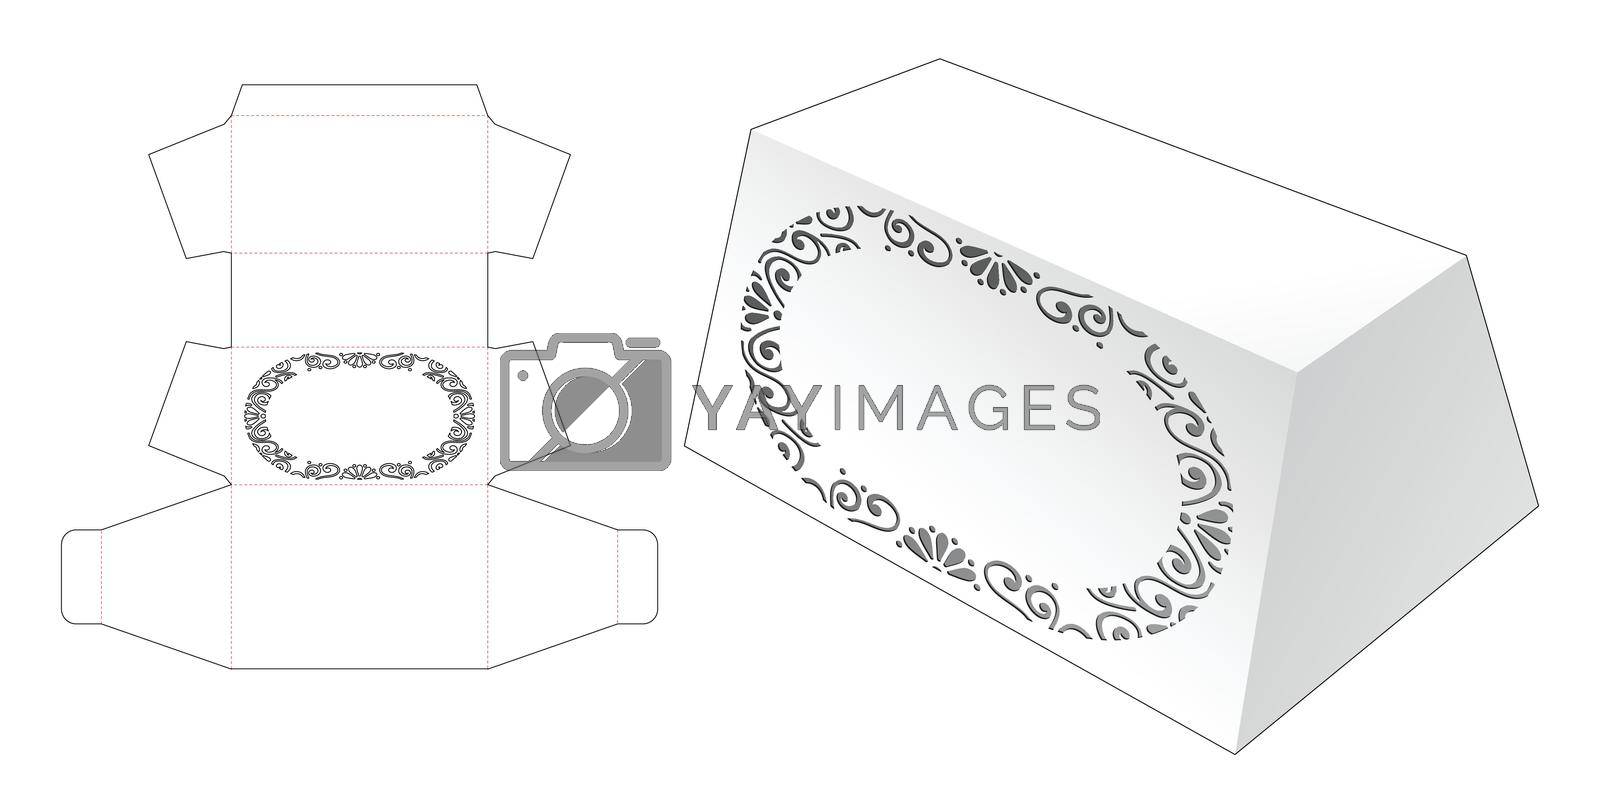 Royalty free image of Trapezoid box and stenciled mandala window die cut template by valueinvestor